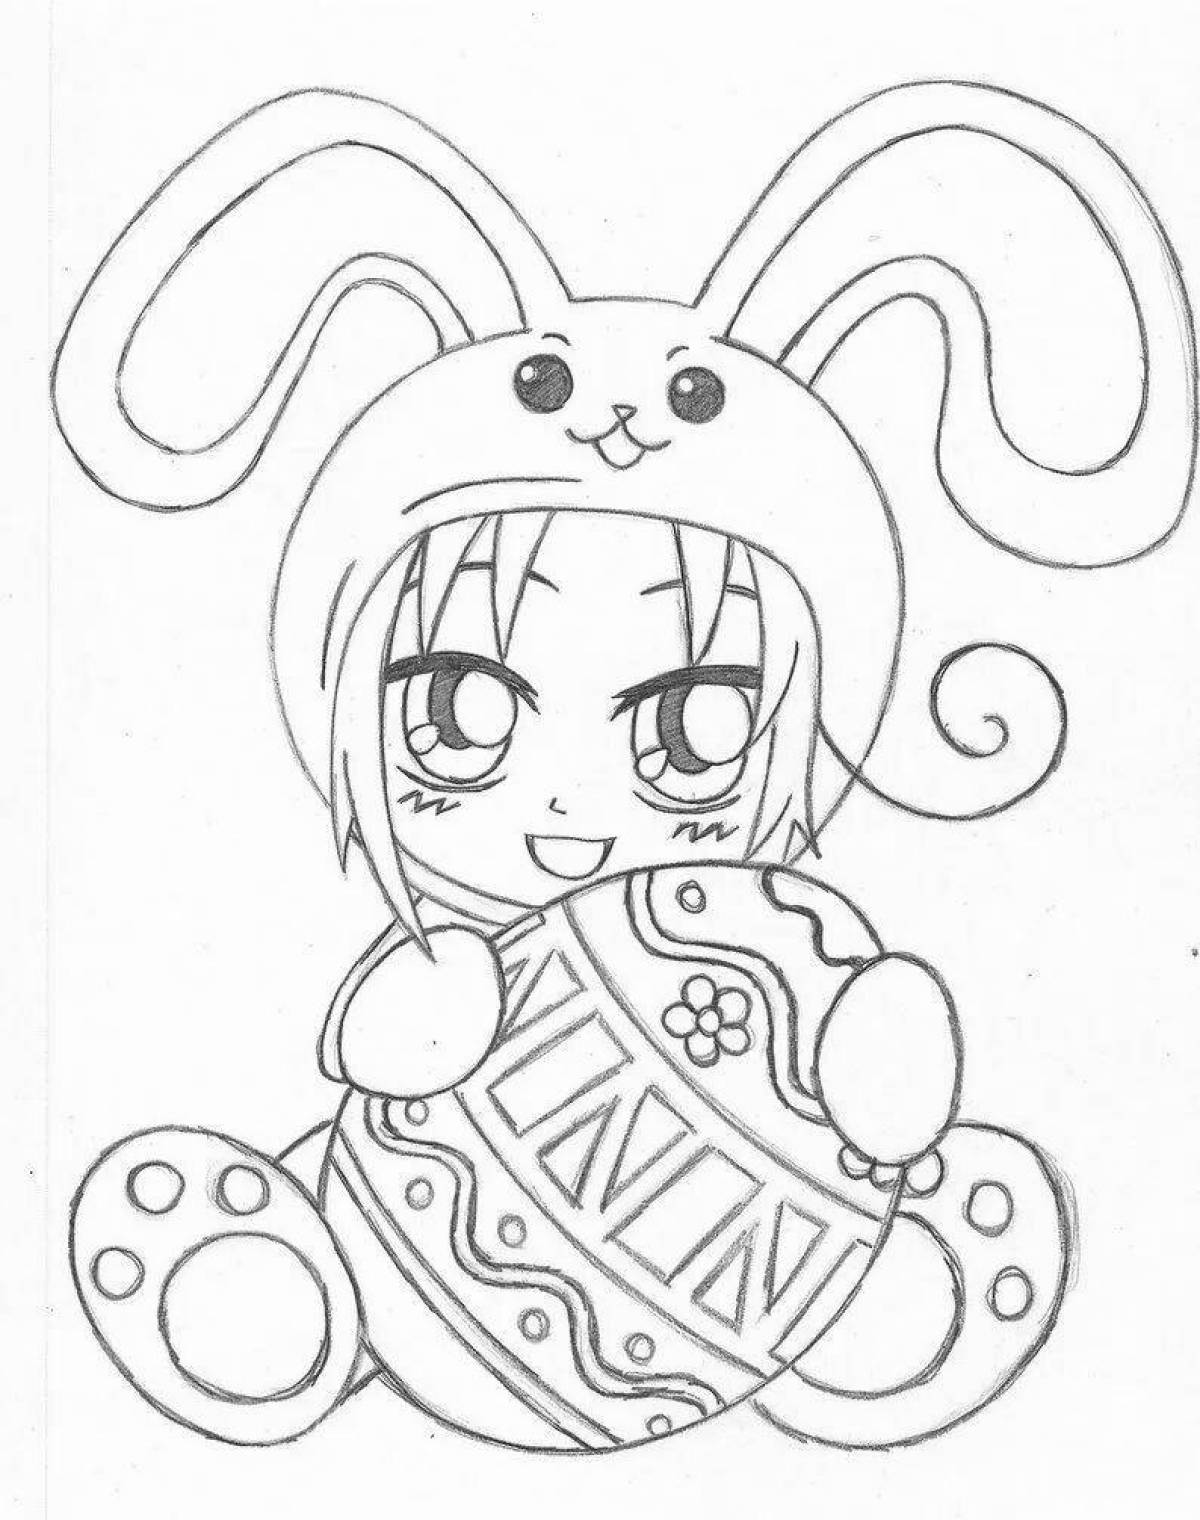 Exquisite anime bunny coloring book